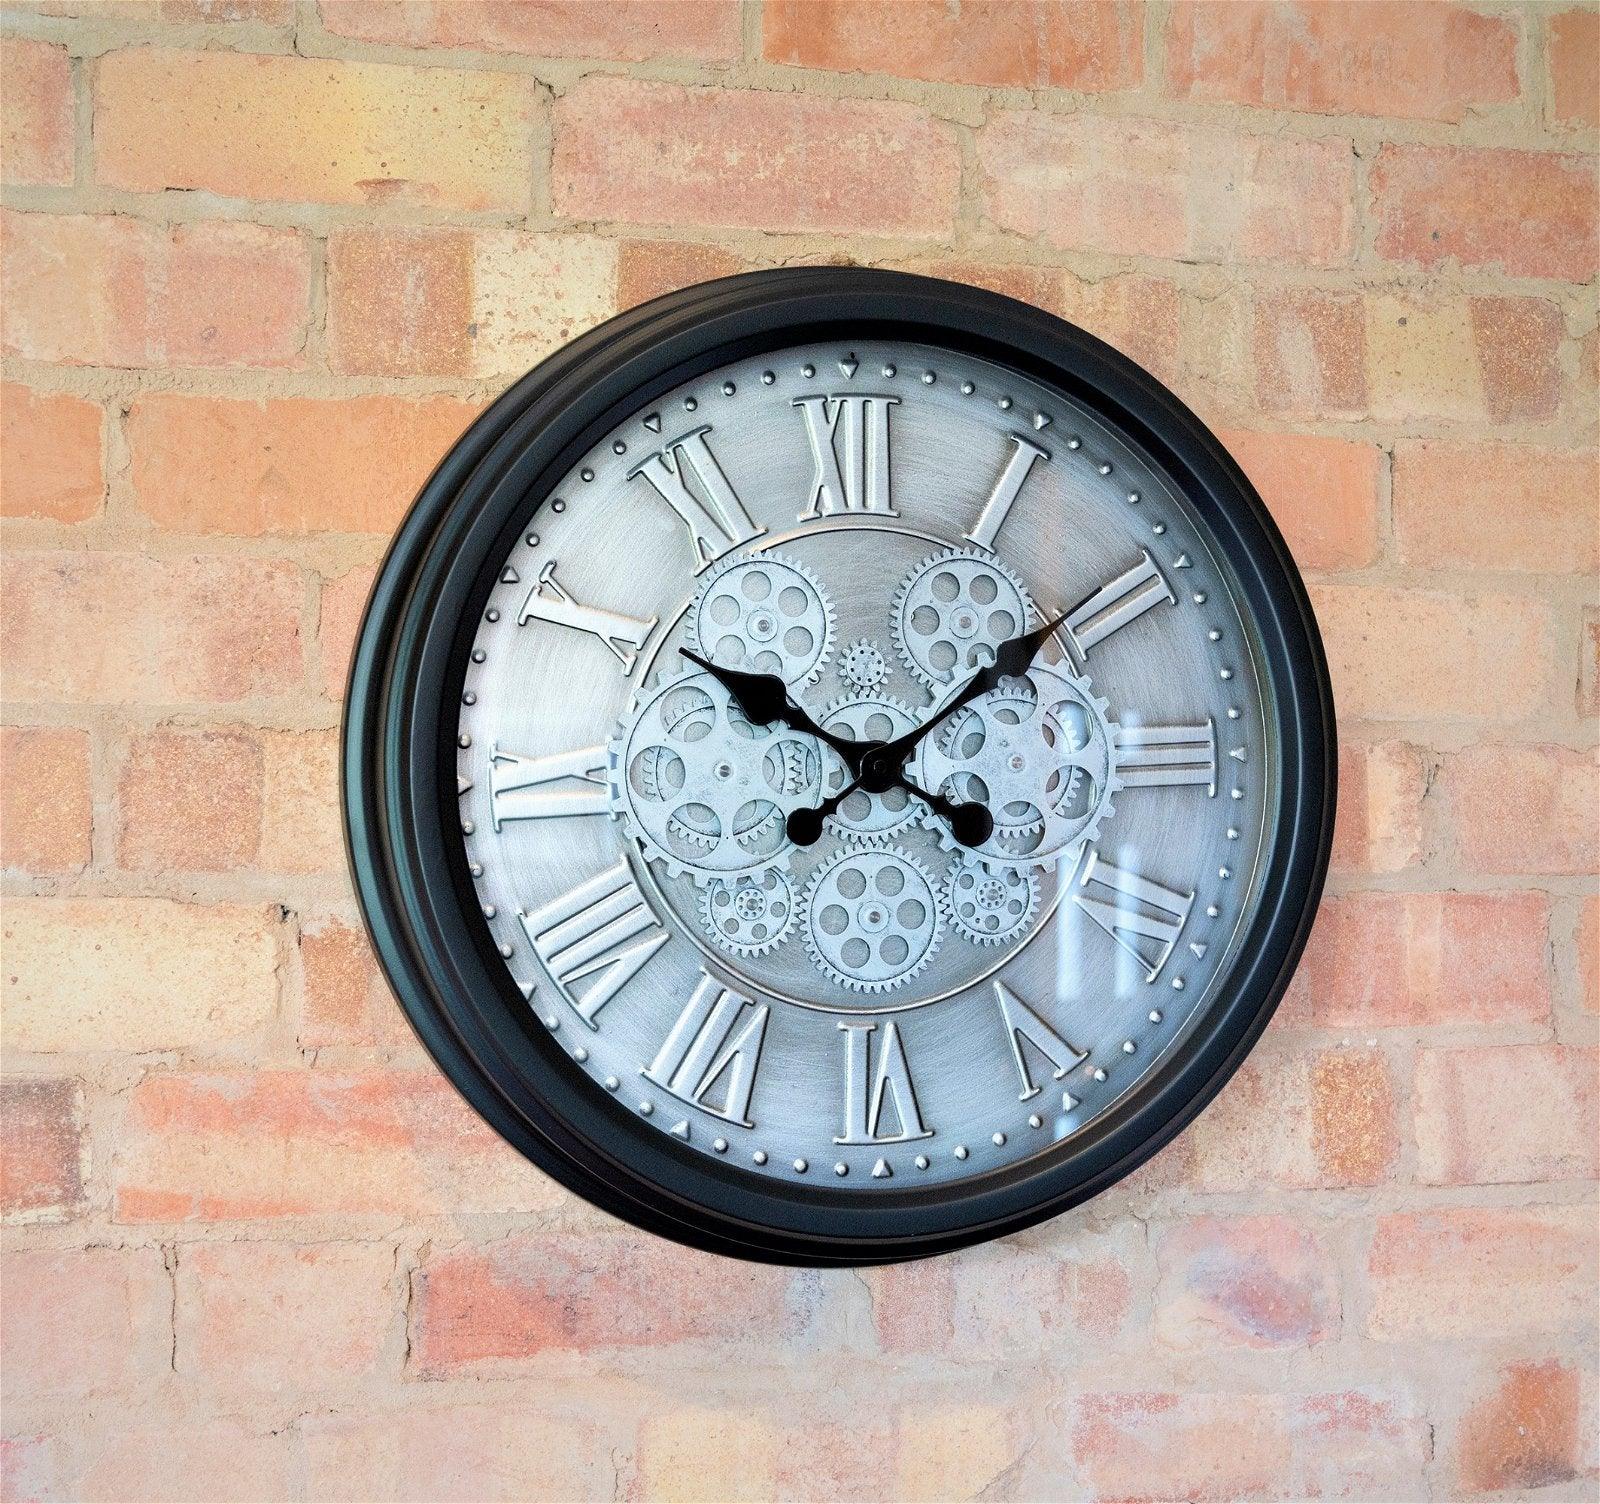 Moving Gear Clock with Roman Numerals - £203.99 - Wall Hanging Clocks 